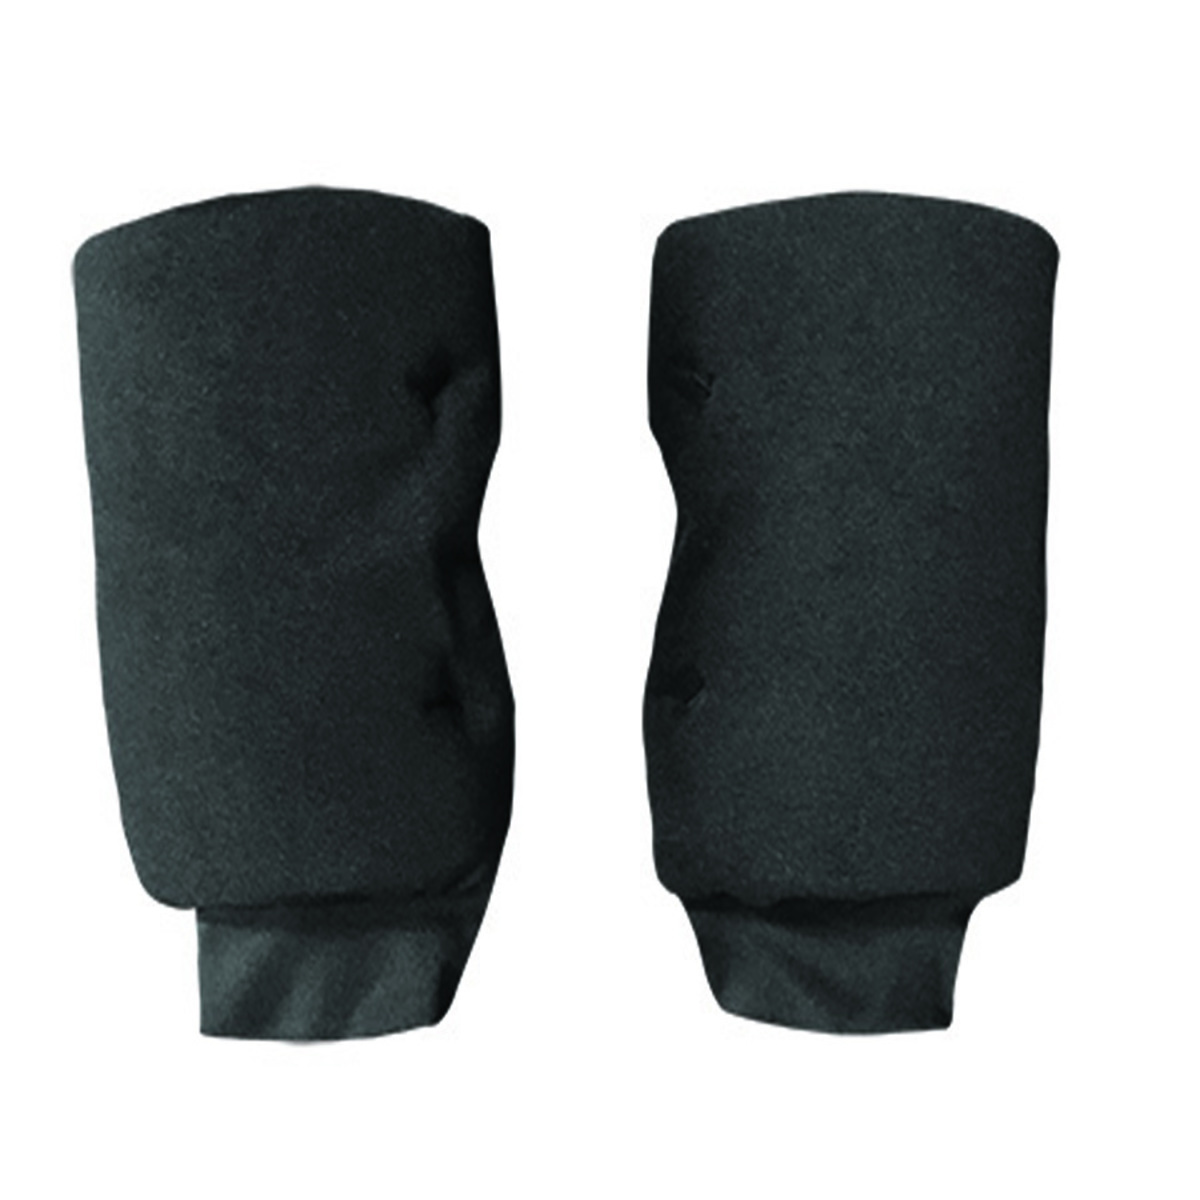 OccuNomix Large Black OccuNomix Polyester/Foam Knee Pad